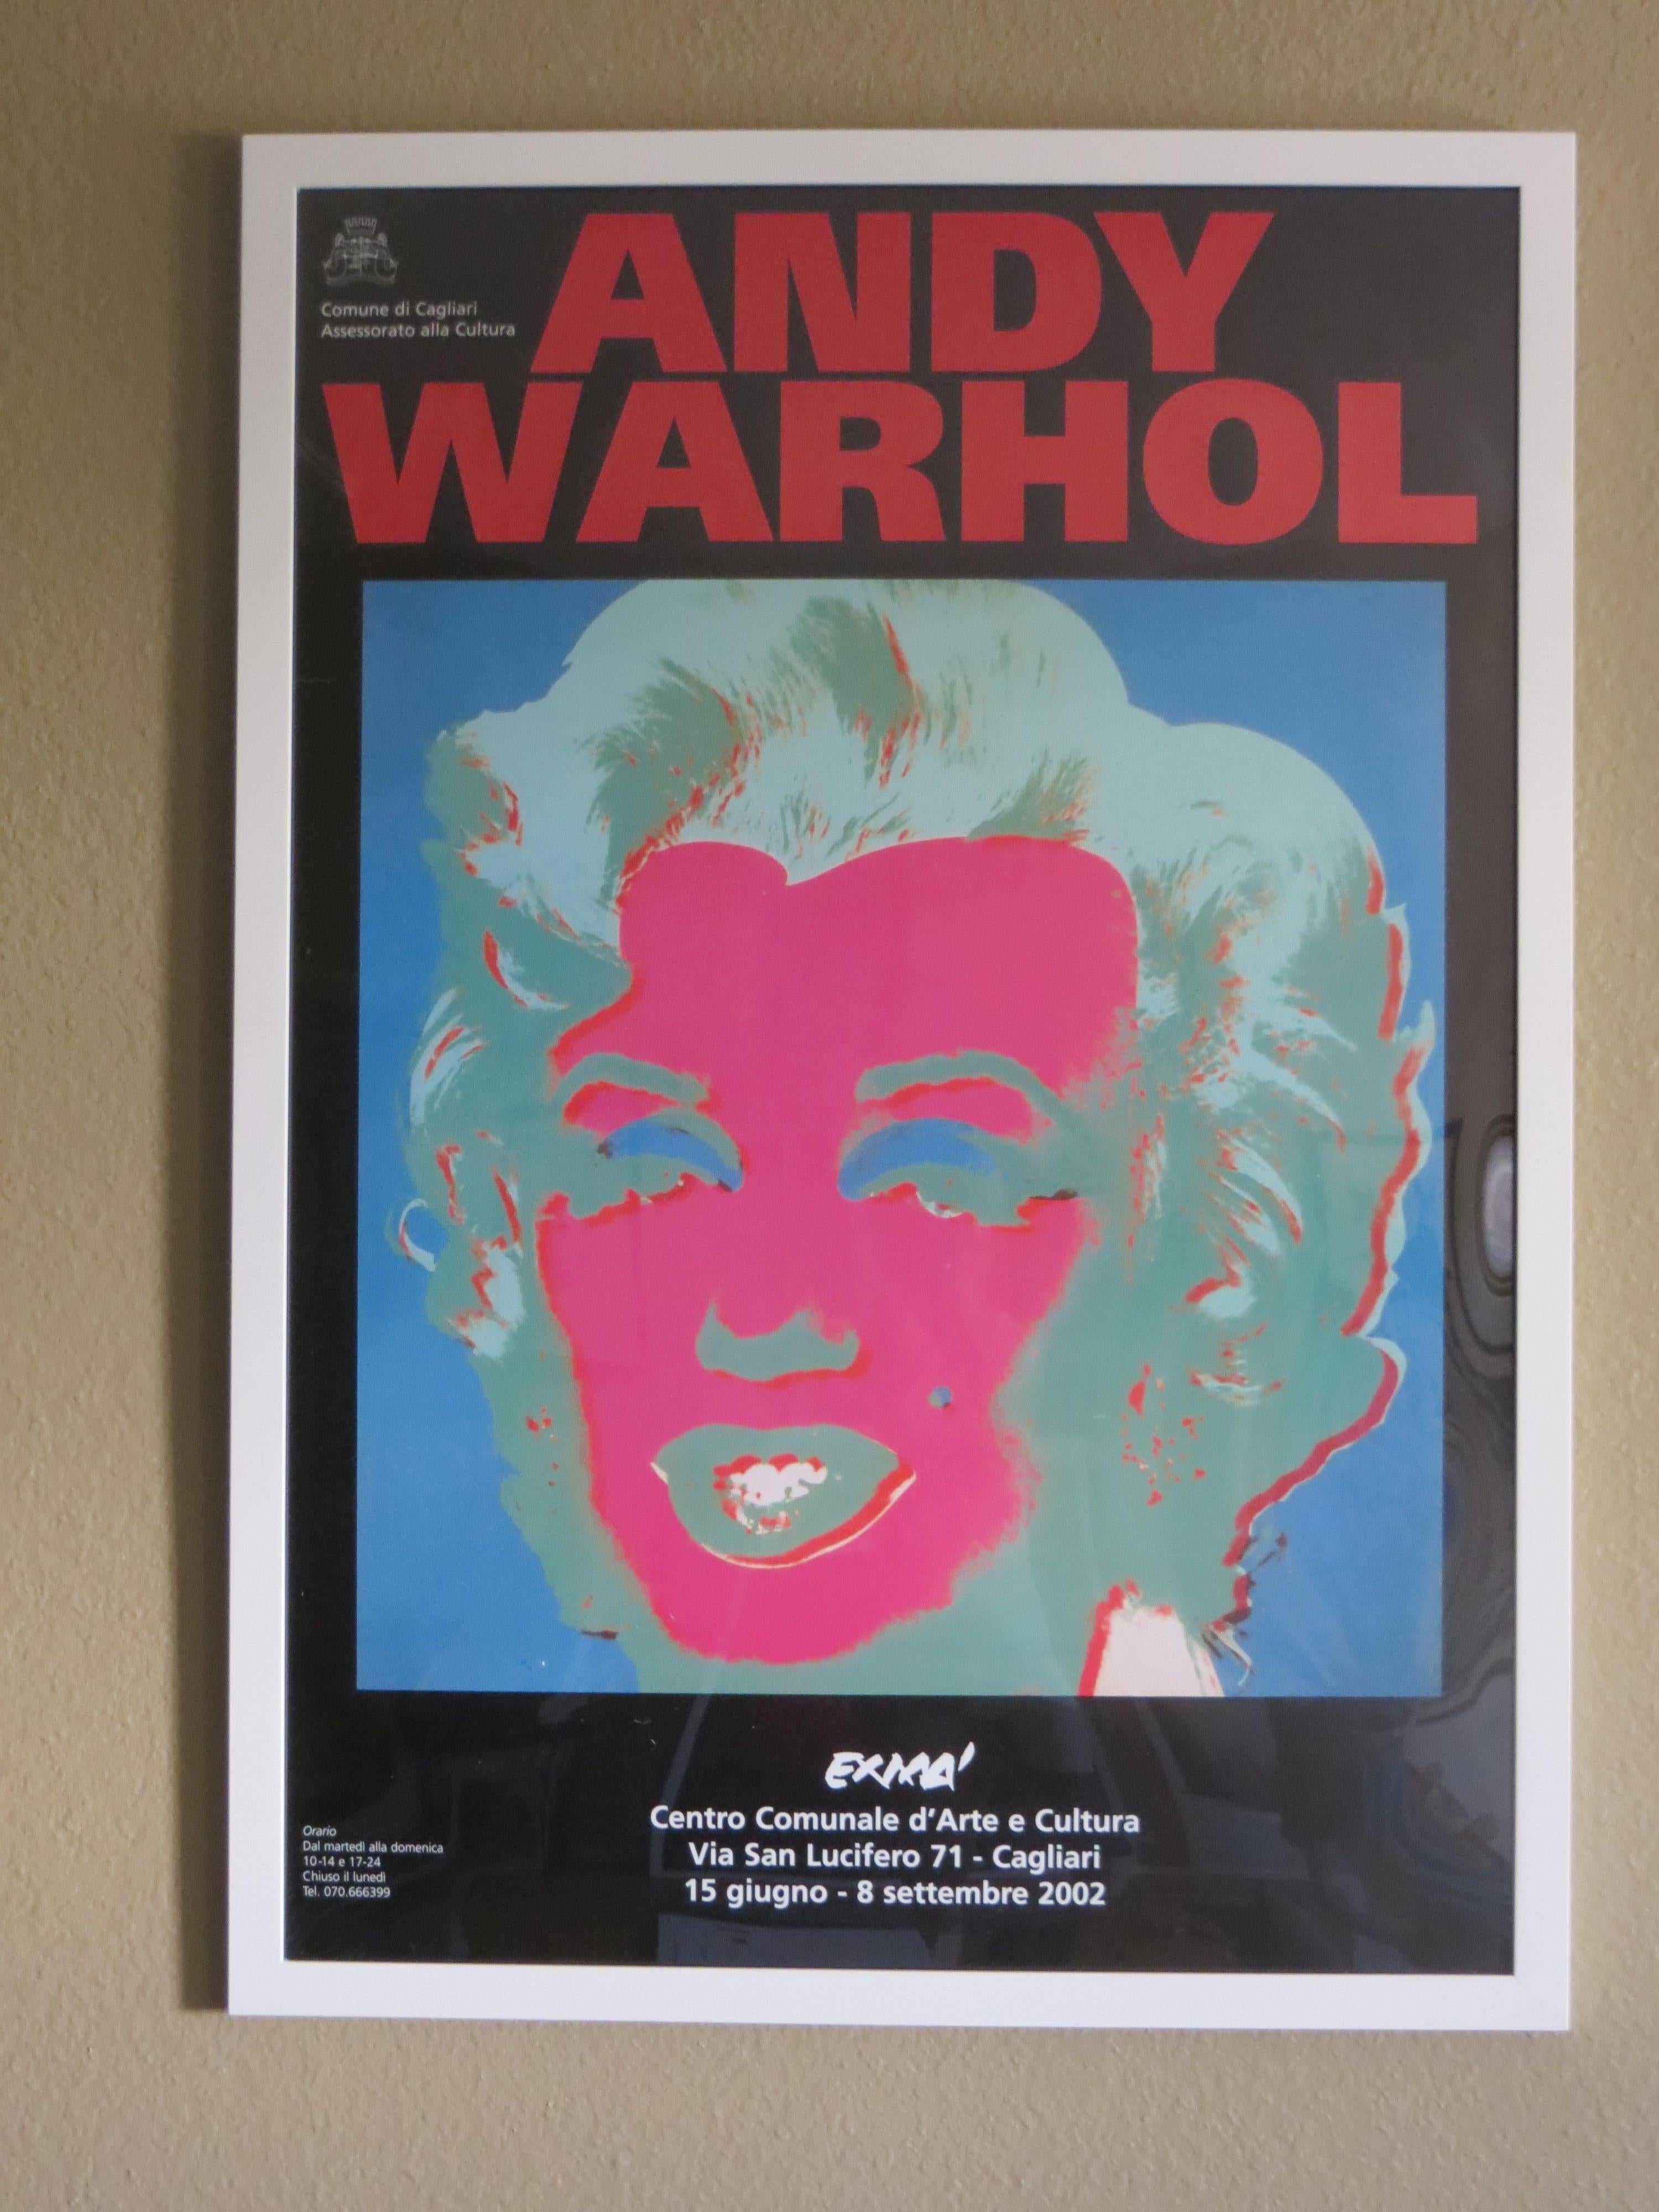  Rare Original Print Exhibition Poster by Andy WarhoLExma Marilyn - Photograph by Andy Warhol